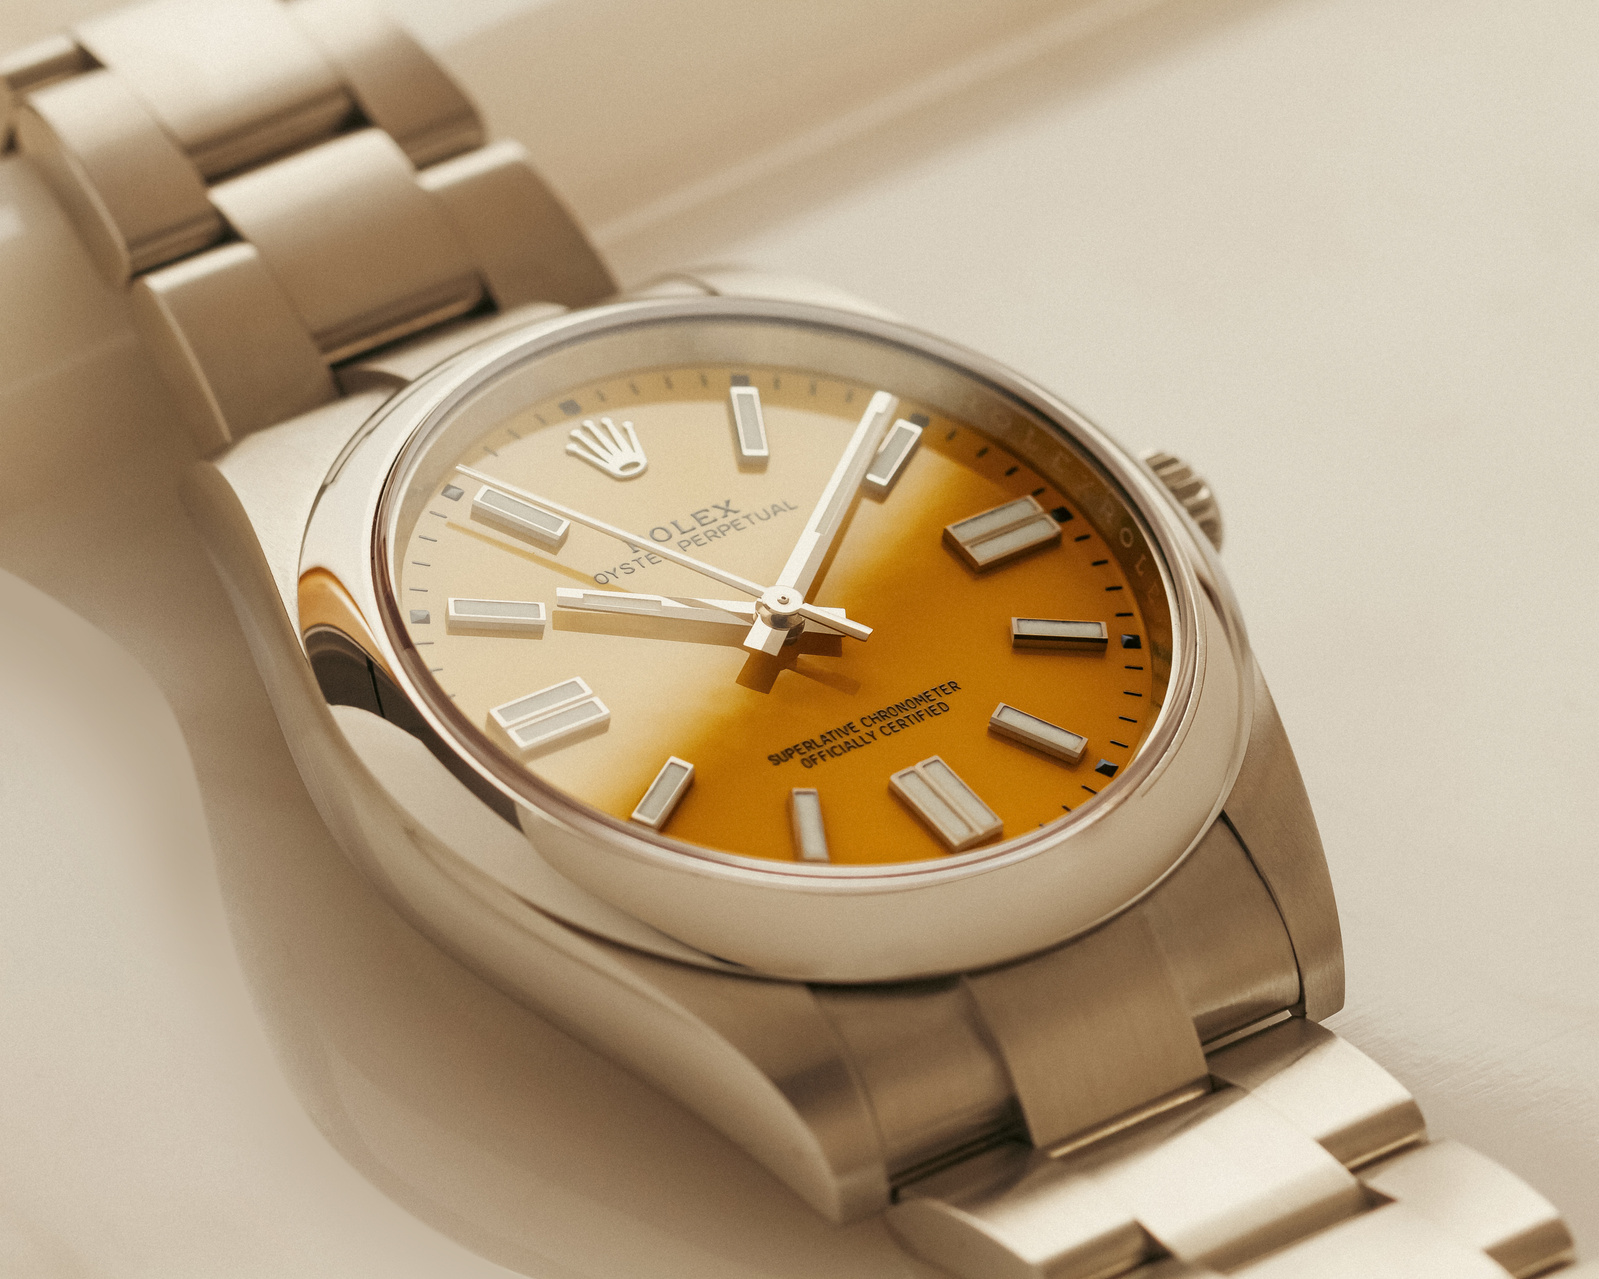 Lifestyle Watch Photography of Rolex Oyster Perpetual watch with yellow dial